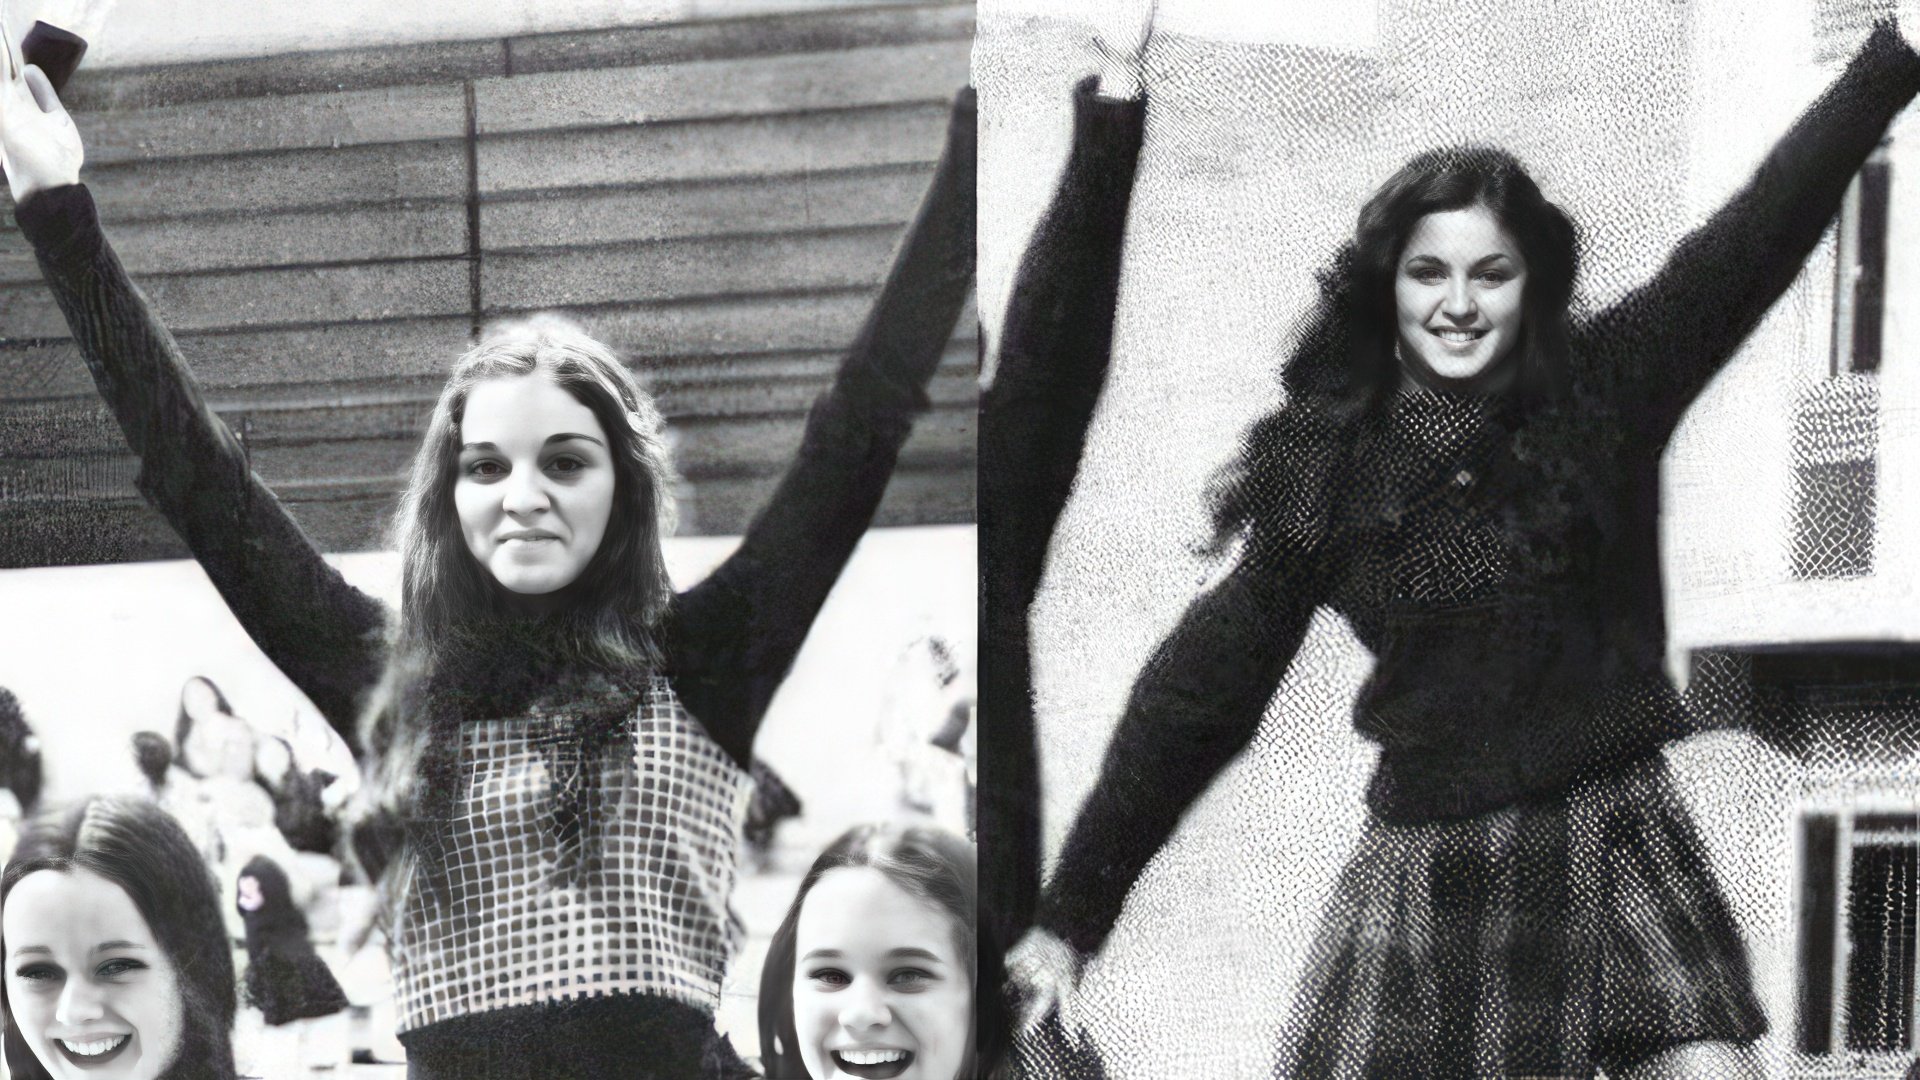 Young Madonna in the cheerleader team